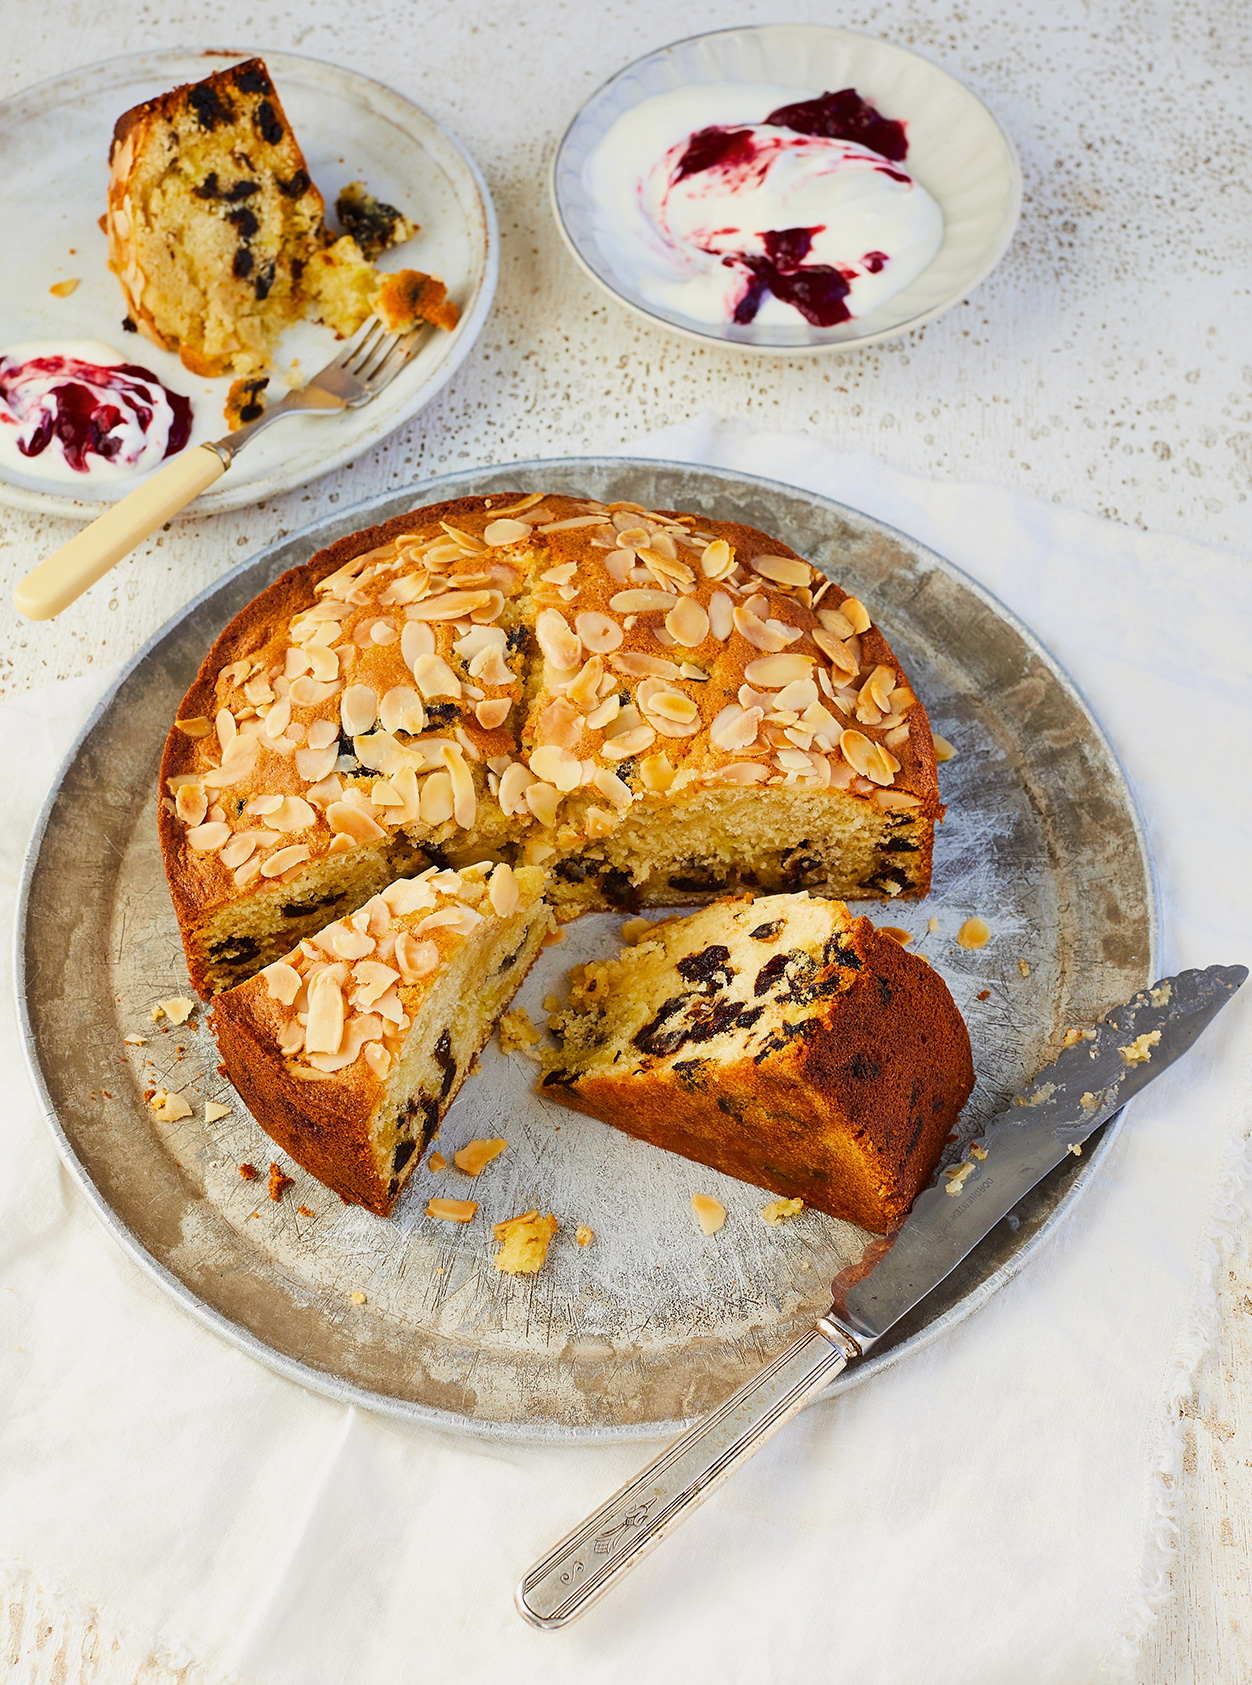 The final product, Prue Leith's Bing cherry and almond cake 